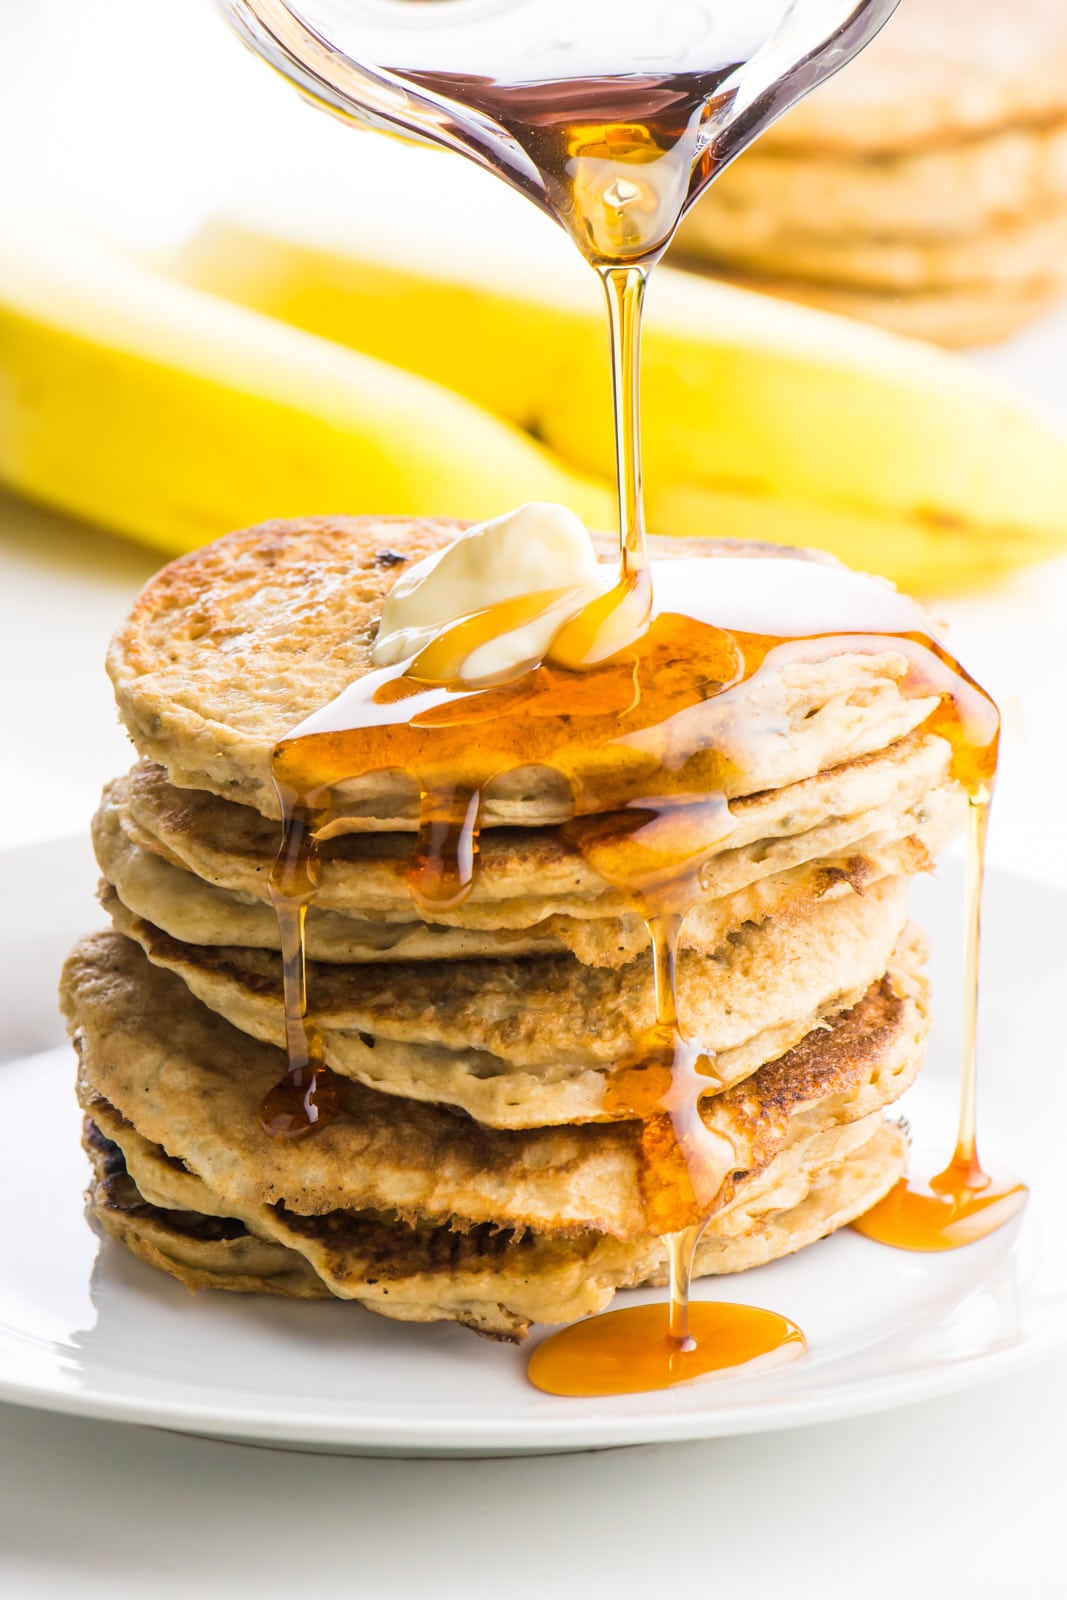 A stack of several vegan banana pancakes sit on a white place with a pat of melty vegan butter on the top. A pitcher is pouring maple syrup over the stack and it is dripping down the sides of the pancakes. There are yellow banana in the background sitting beside another stack of pancakes.